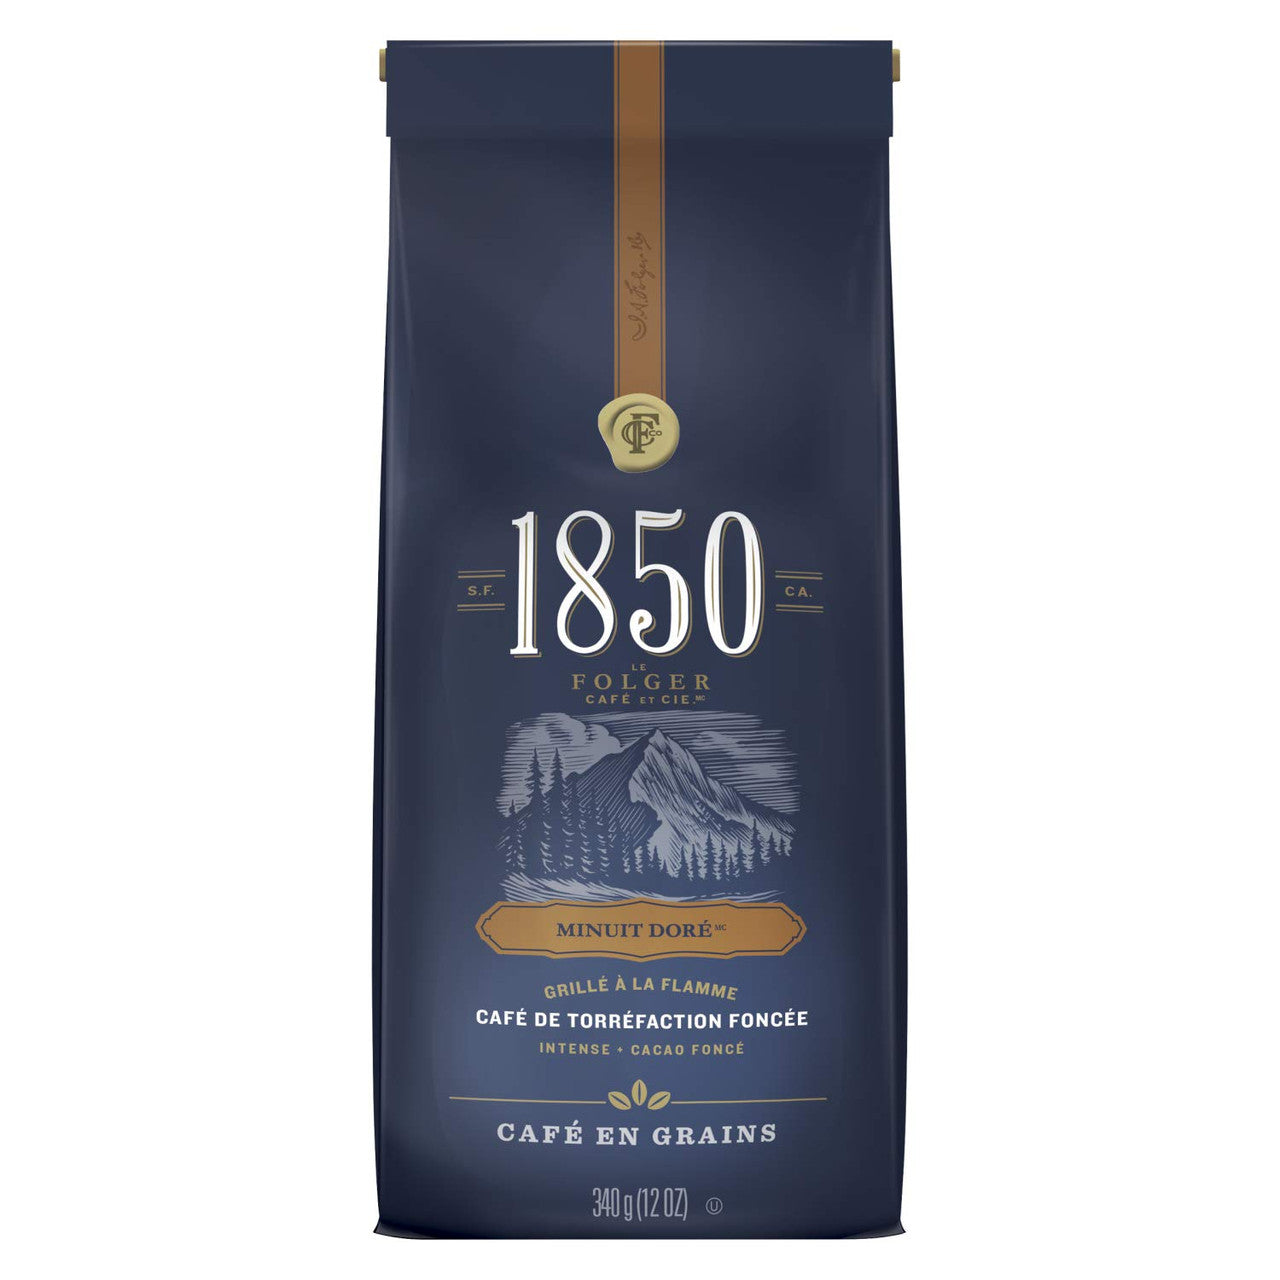 Folgers, 1850 Midnight Gold, Whole Bean Coffee, 340g/12oz., {Imported from Canada}